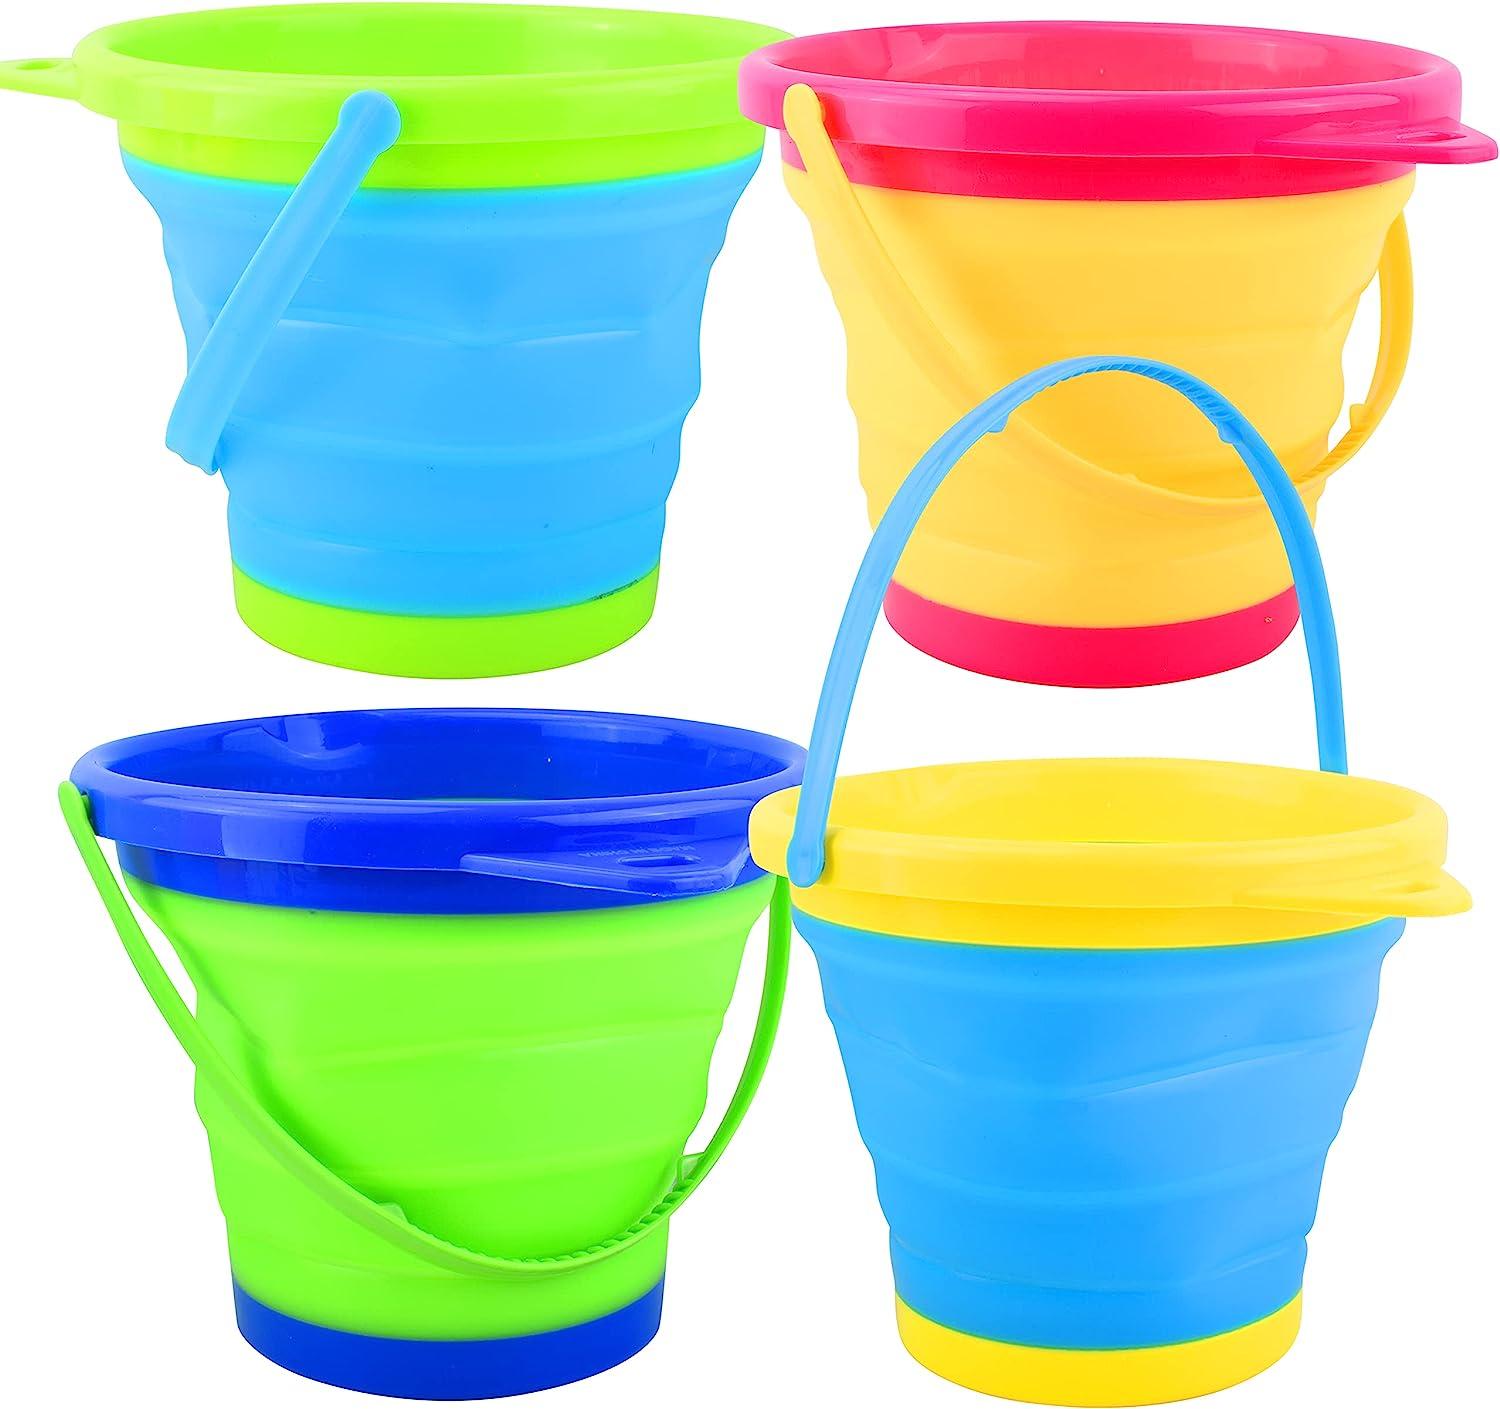 JOYIN 4 Collapsible Buckets & Basket for Kid, 2L Foldable Round Tub  Portable Pail for Summer Beach, Camping Gear Water, Fishing, and Fun Summer  Activities